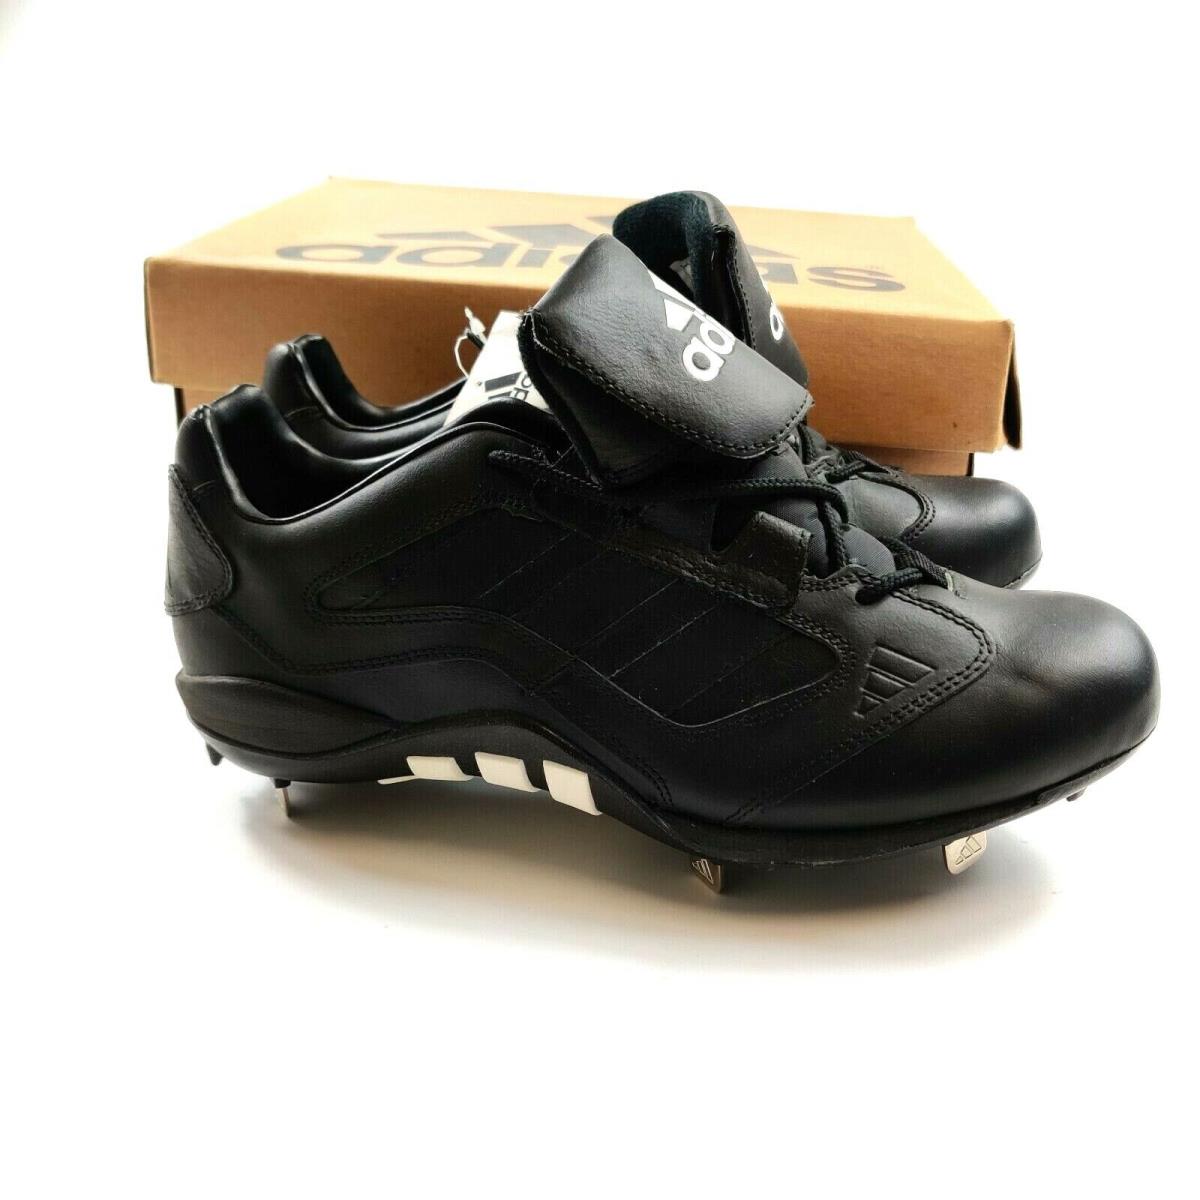 Vintage Adidas Mens Size 9.5 Black Soccer Shoes Cleats Mvp LO 1NB Cleated Nos